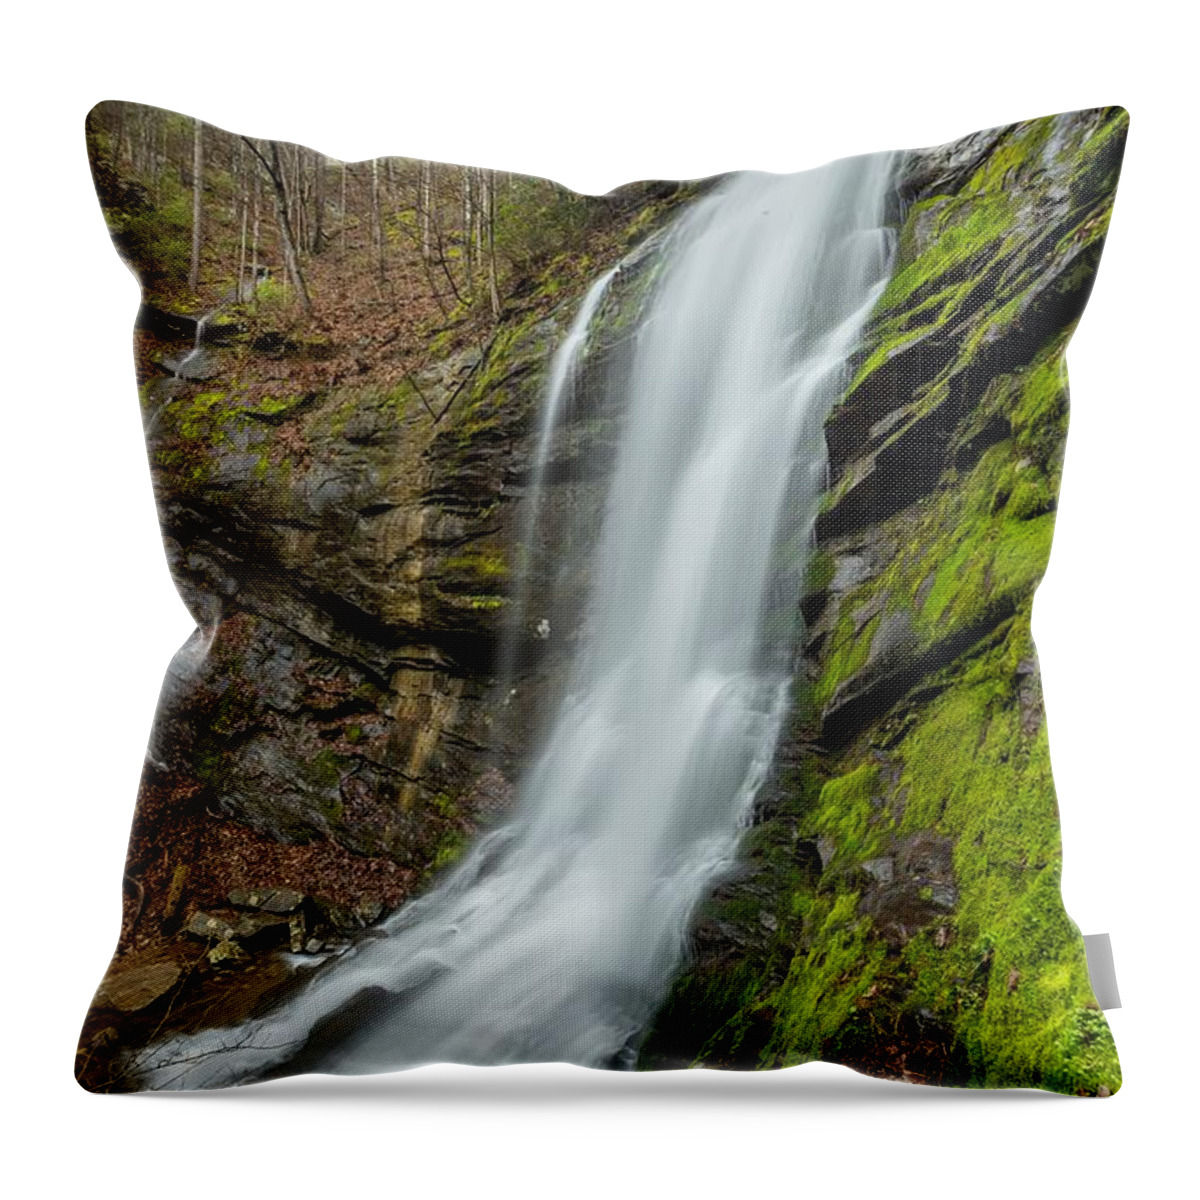 Sill Branch Falls Throw Pillow featuring the photograph Sill Branch Falls by Chris Berrier